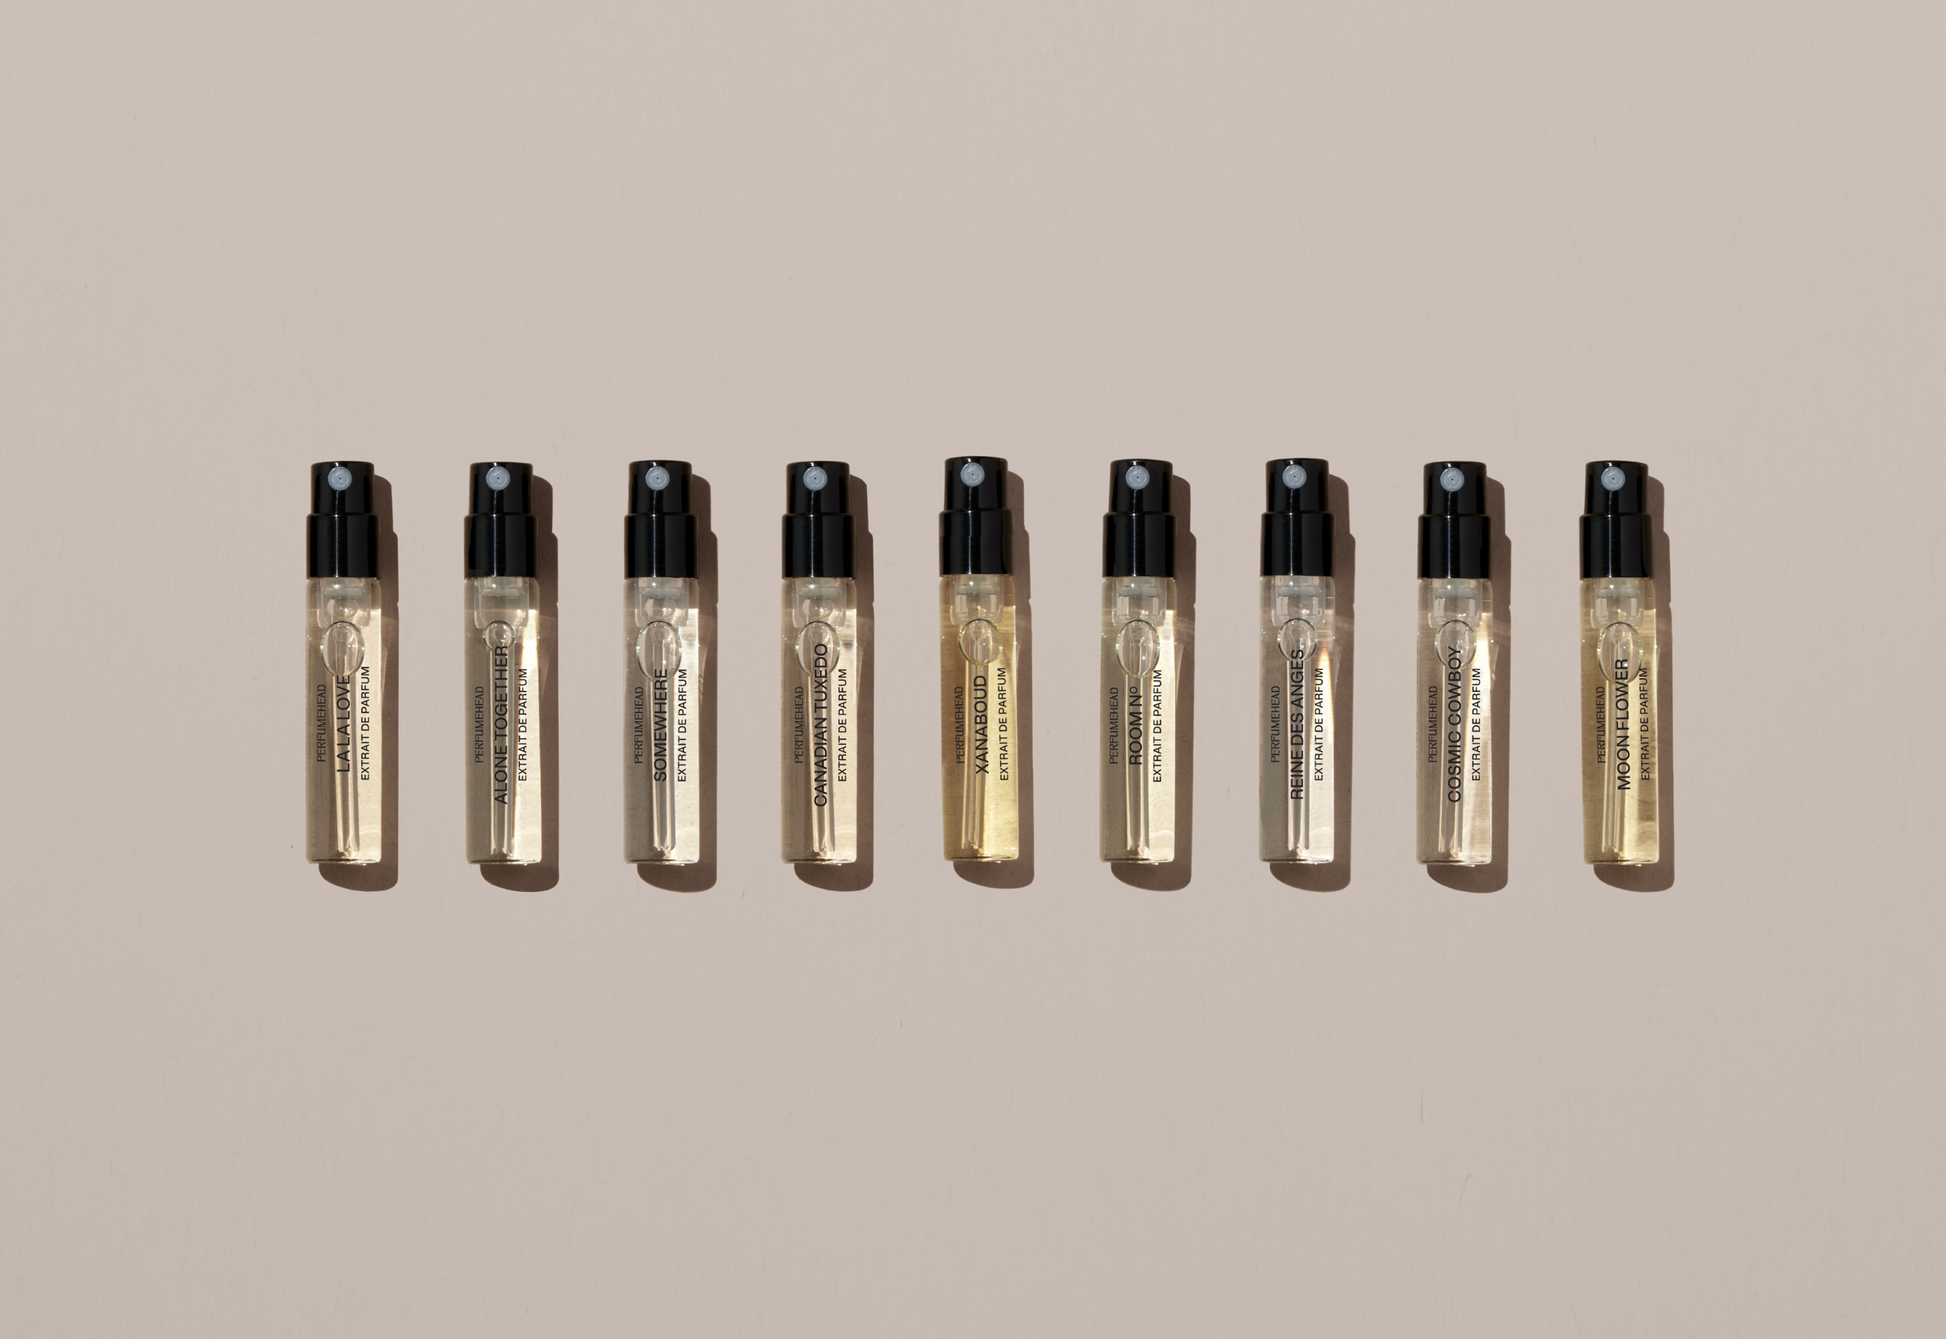 The ICONS Collection by Perfumehead. Nine extrait de parfum fragrance samples in their vials. 